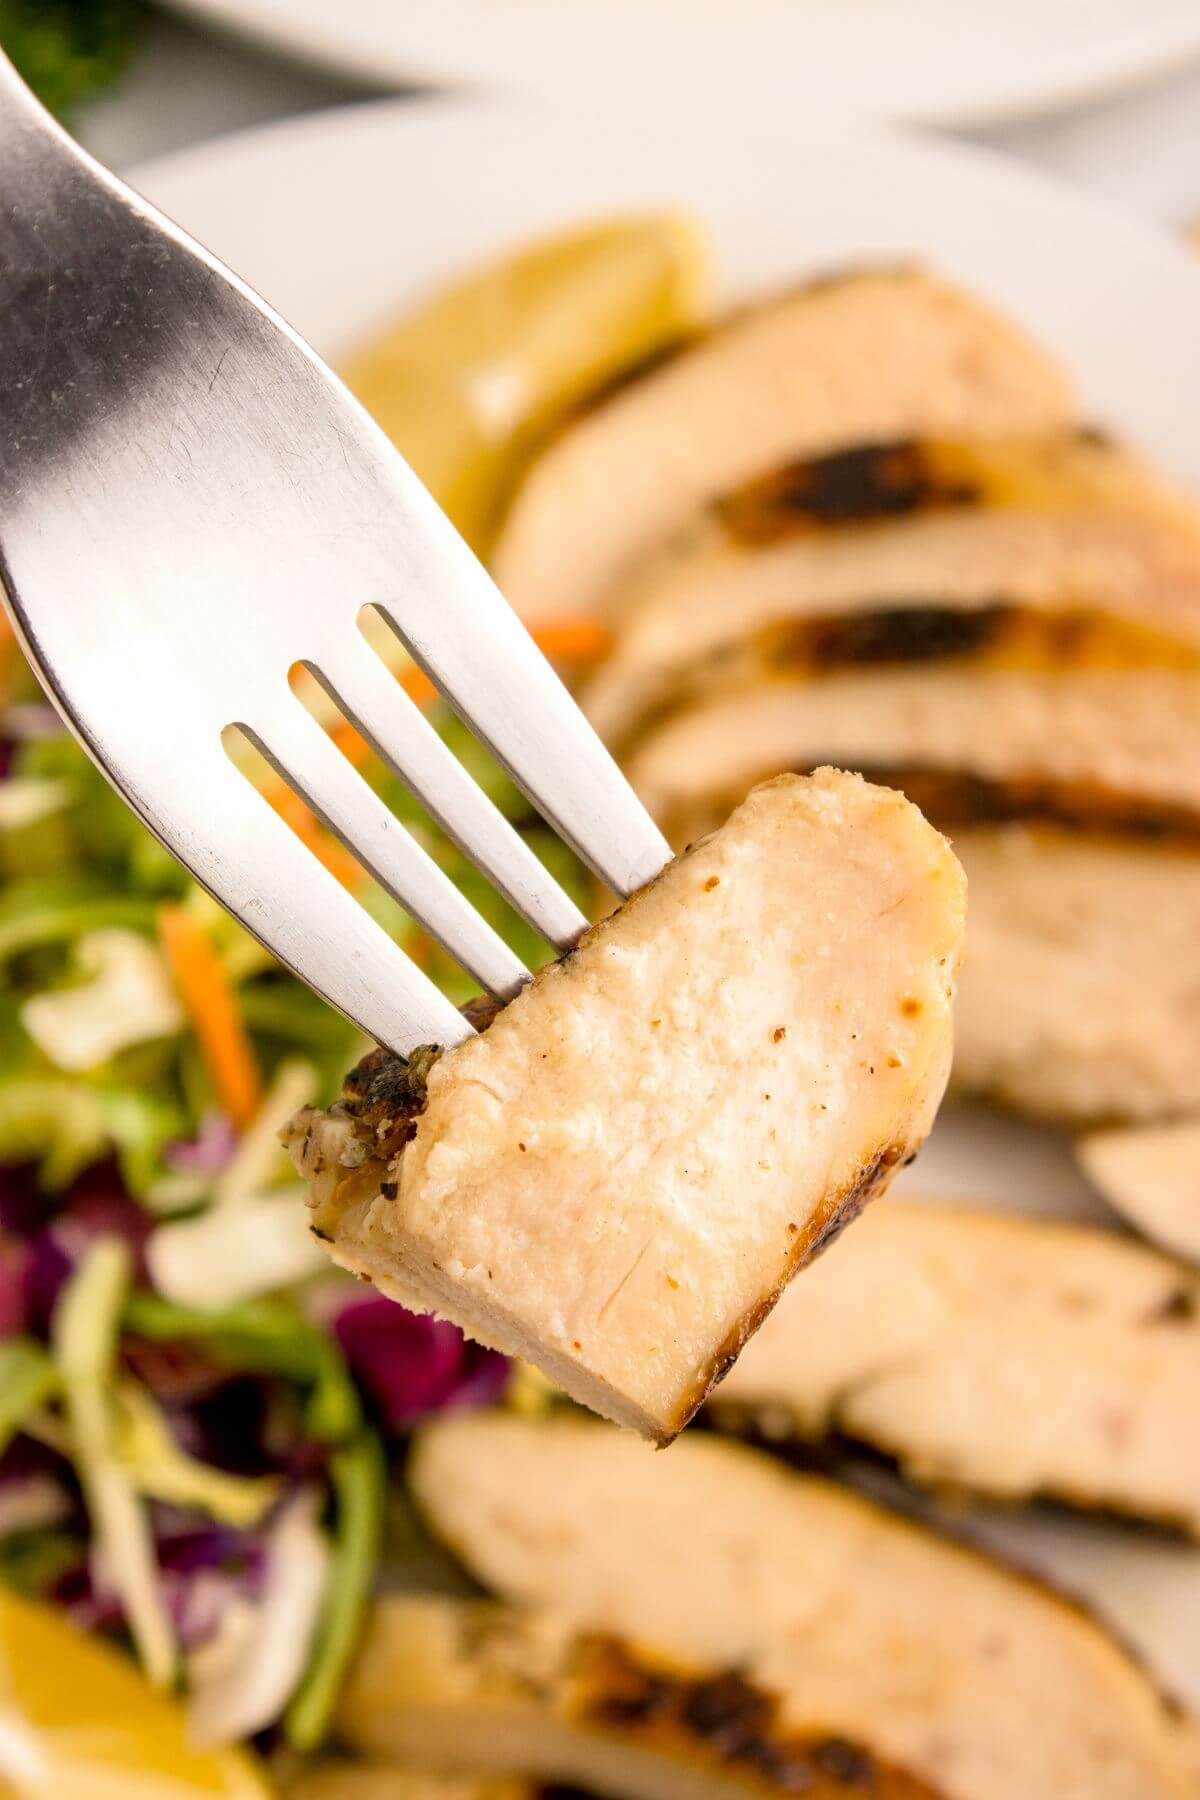 A fork holds up half a slice of chicken over the plate of food.